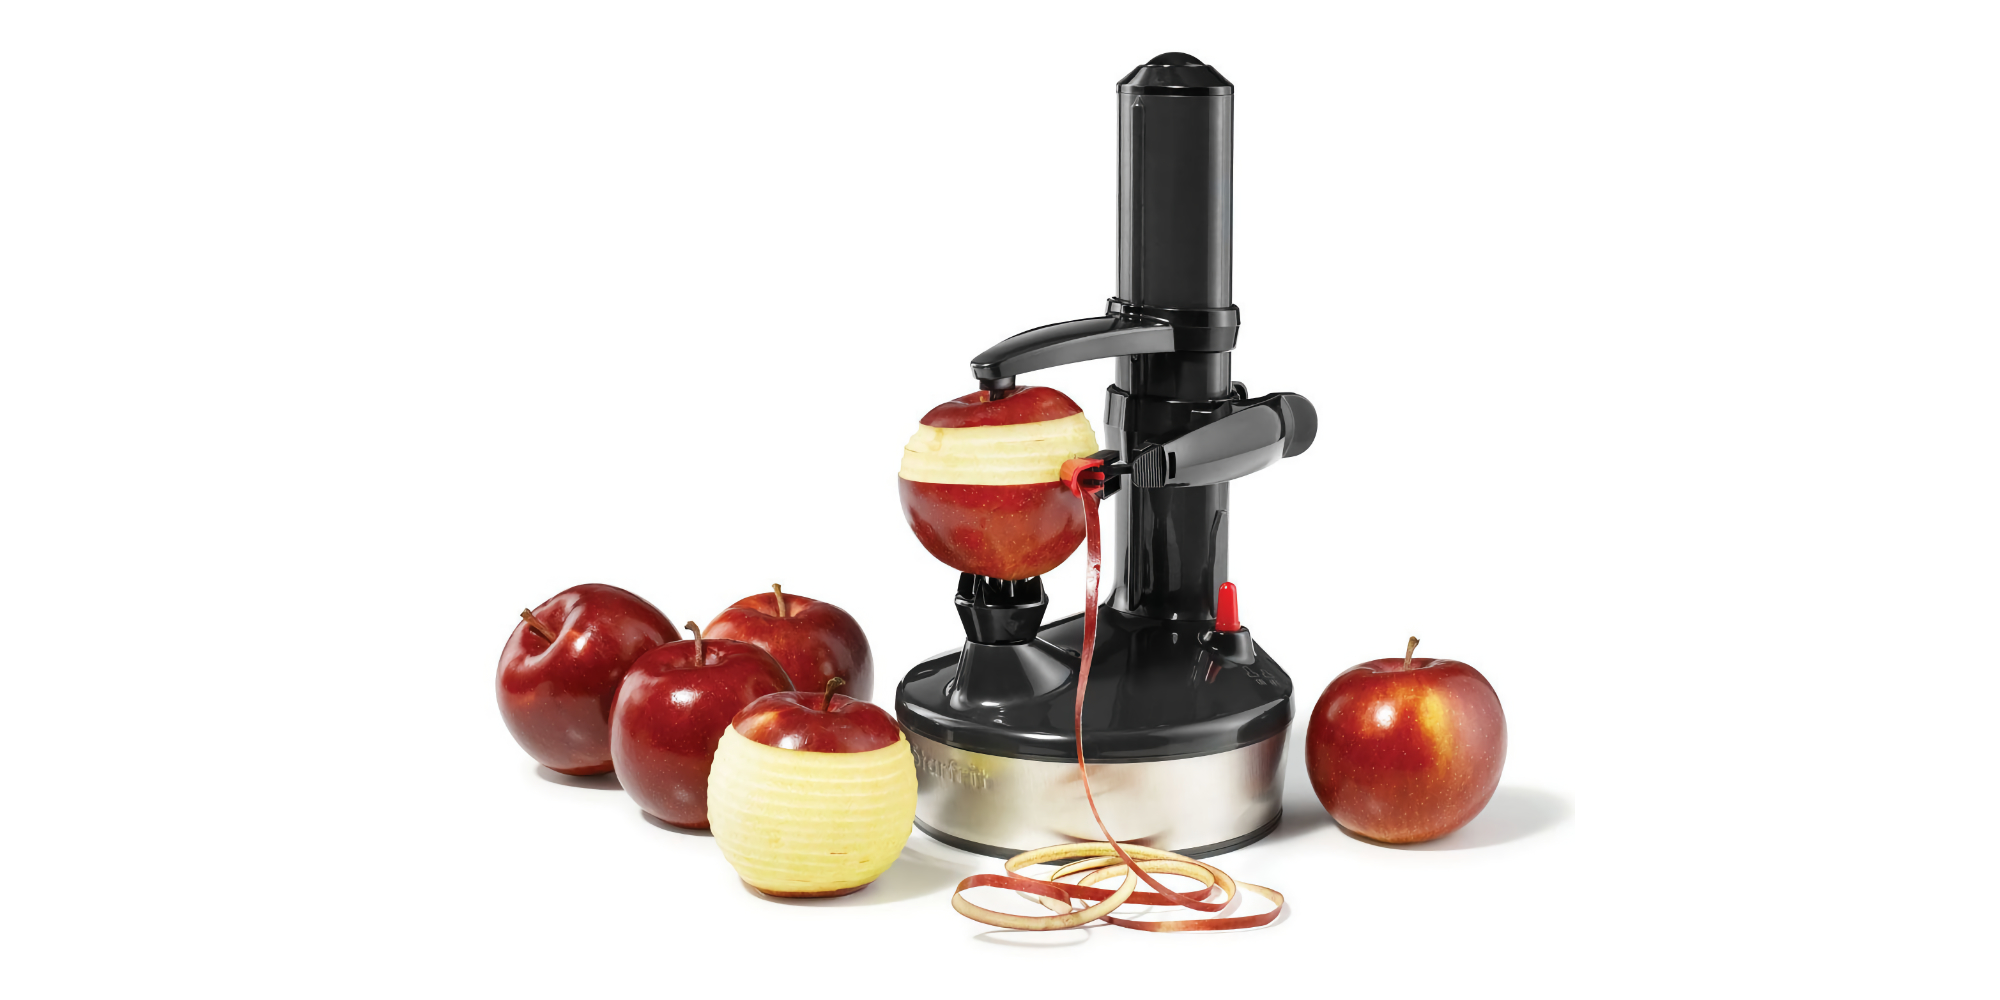 Starfrit Rotato Express Electric Peeler Review and Demonstration 